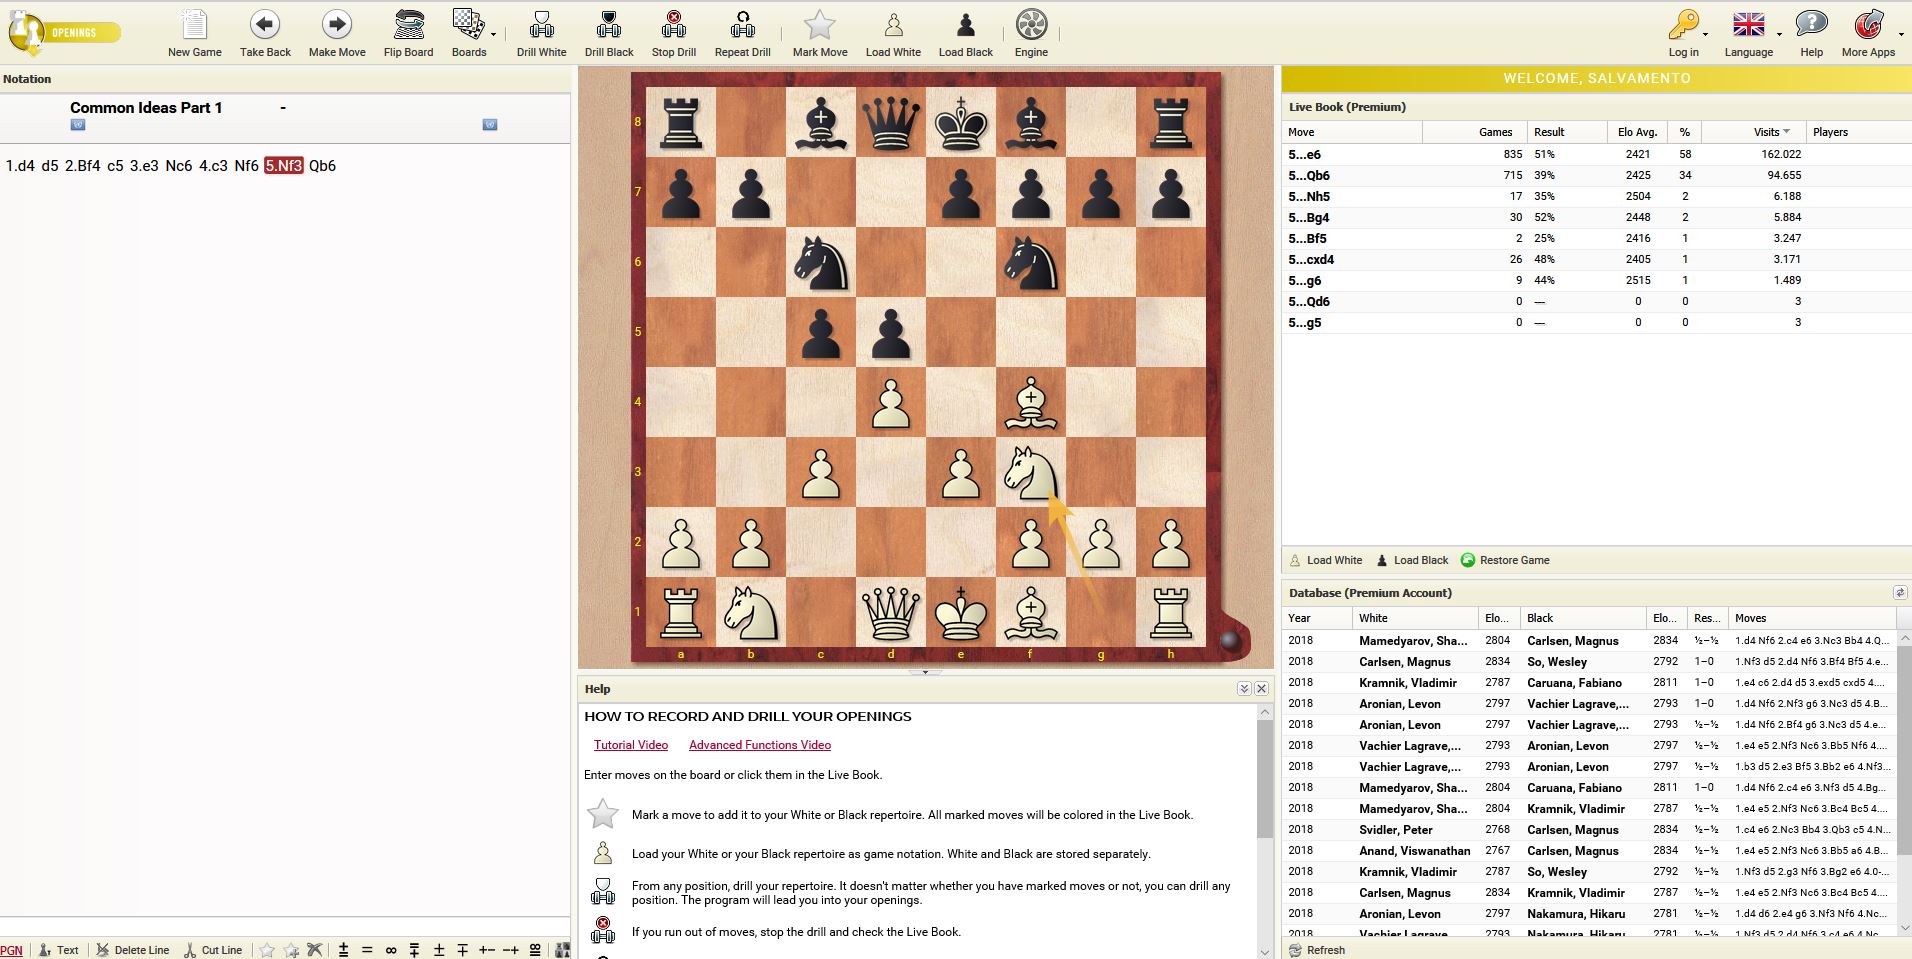 How to Study Openings Using Chessbase 